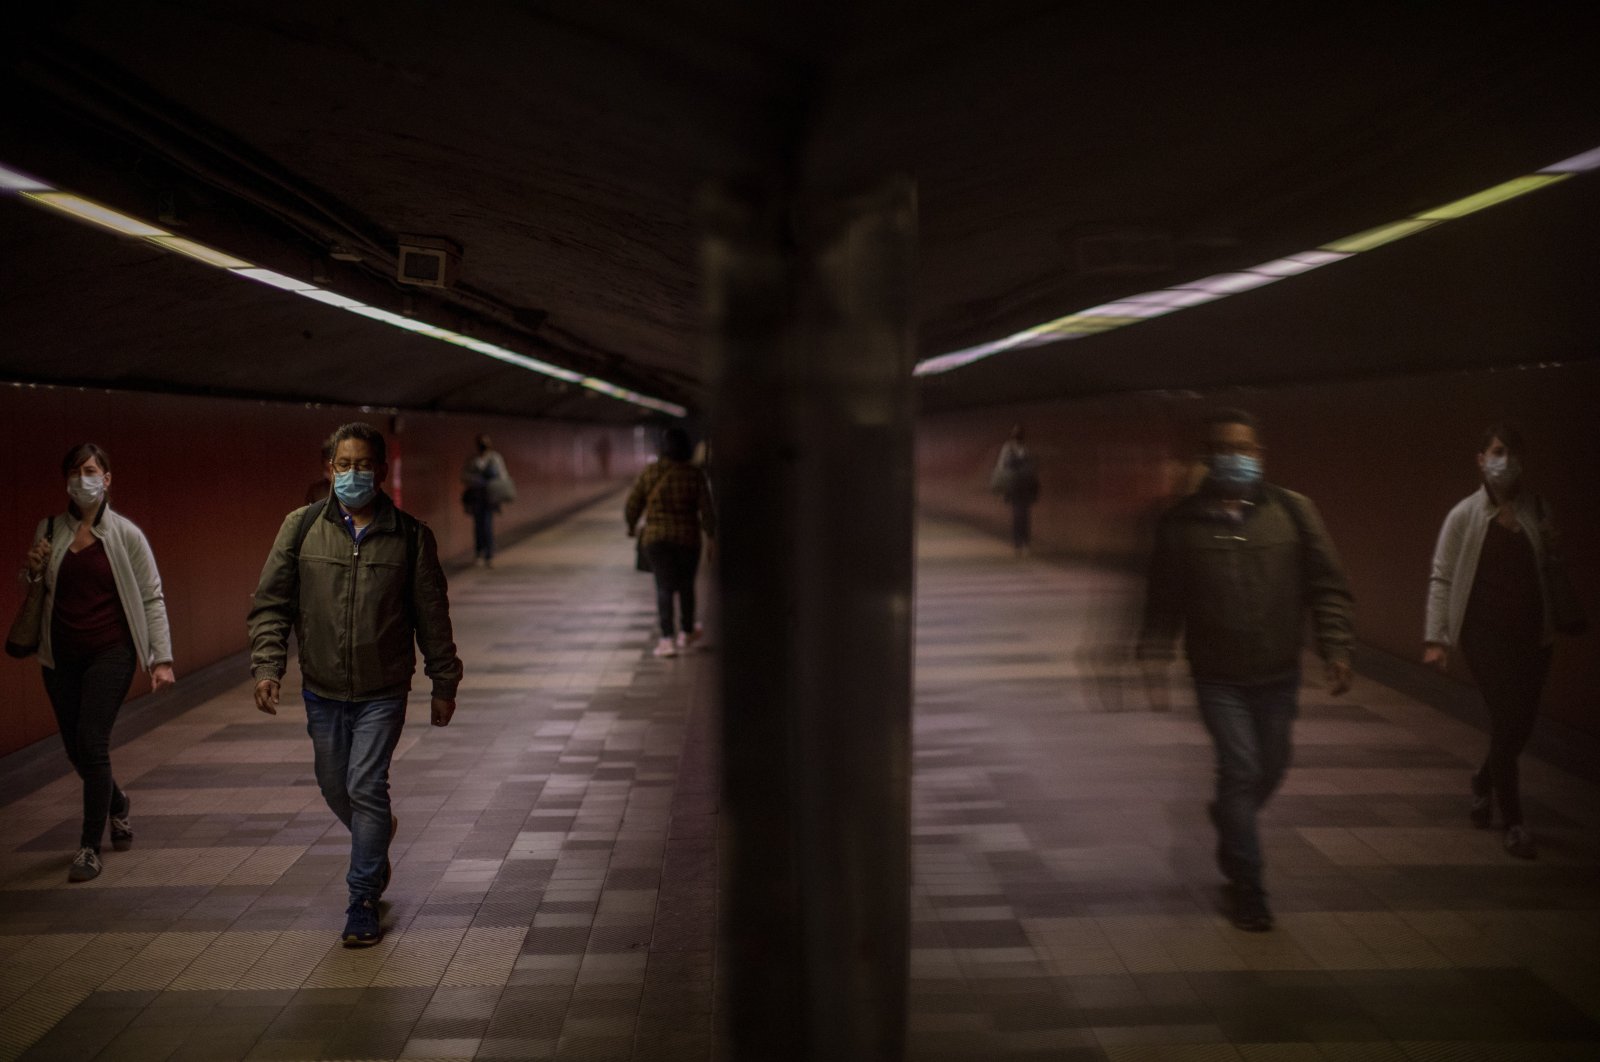 Passengers walk along a tunnel connecting platforms in a metro station in Barcelona, Spain, April 15, 2020. (AP Photo)